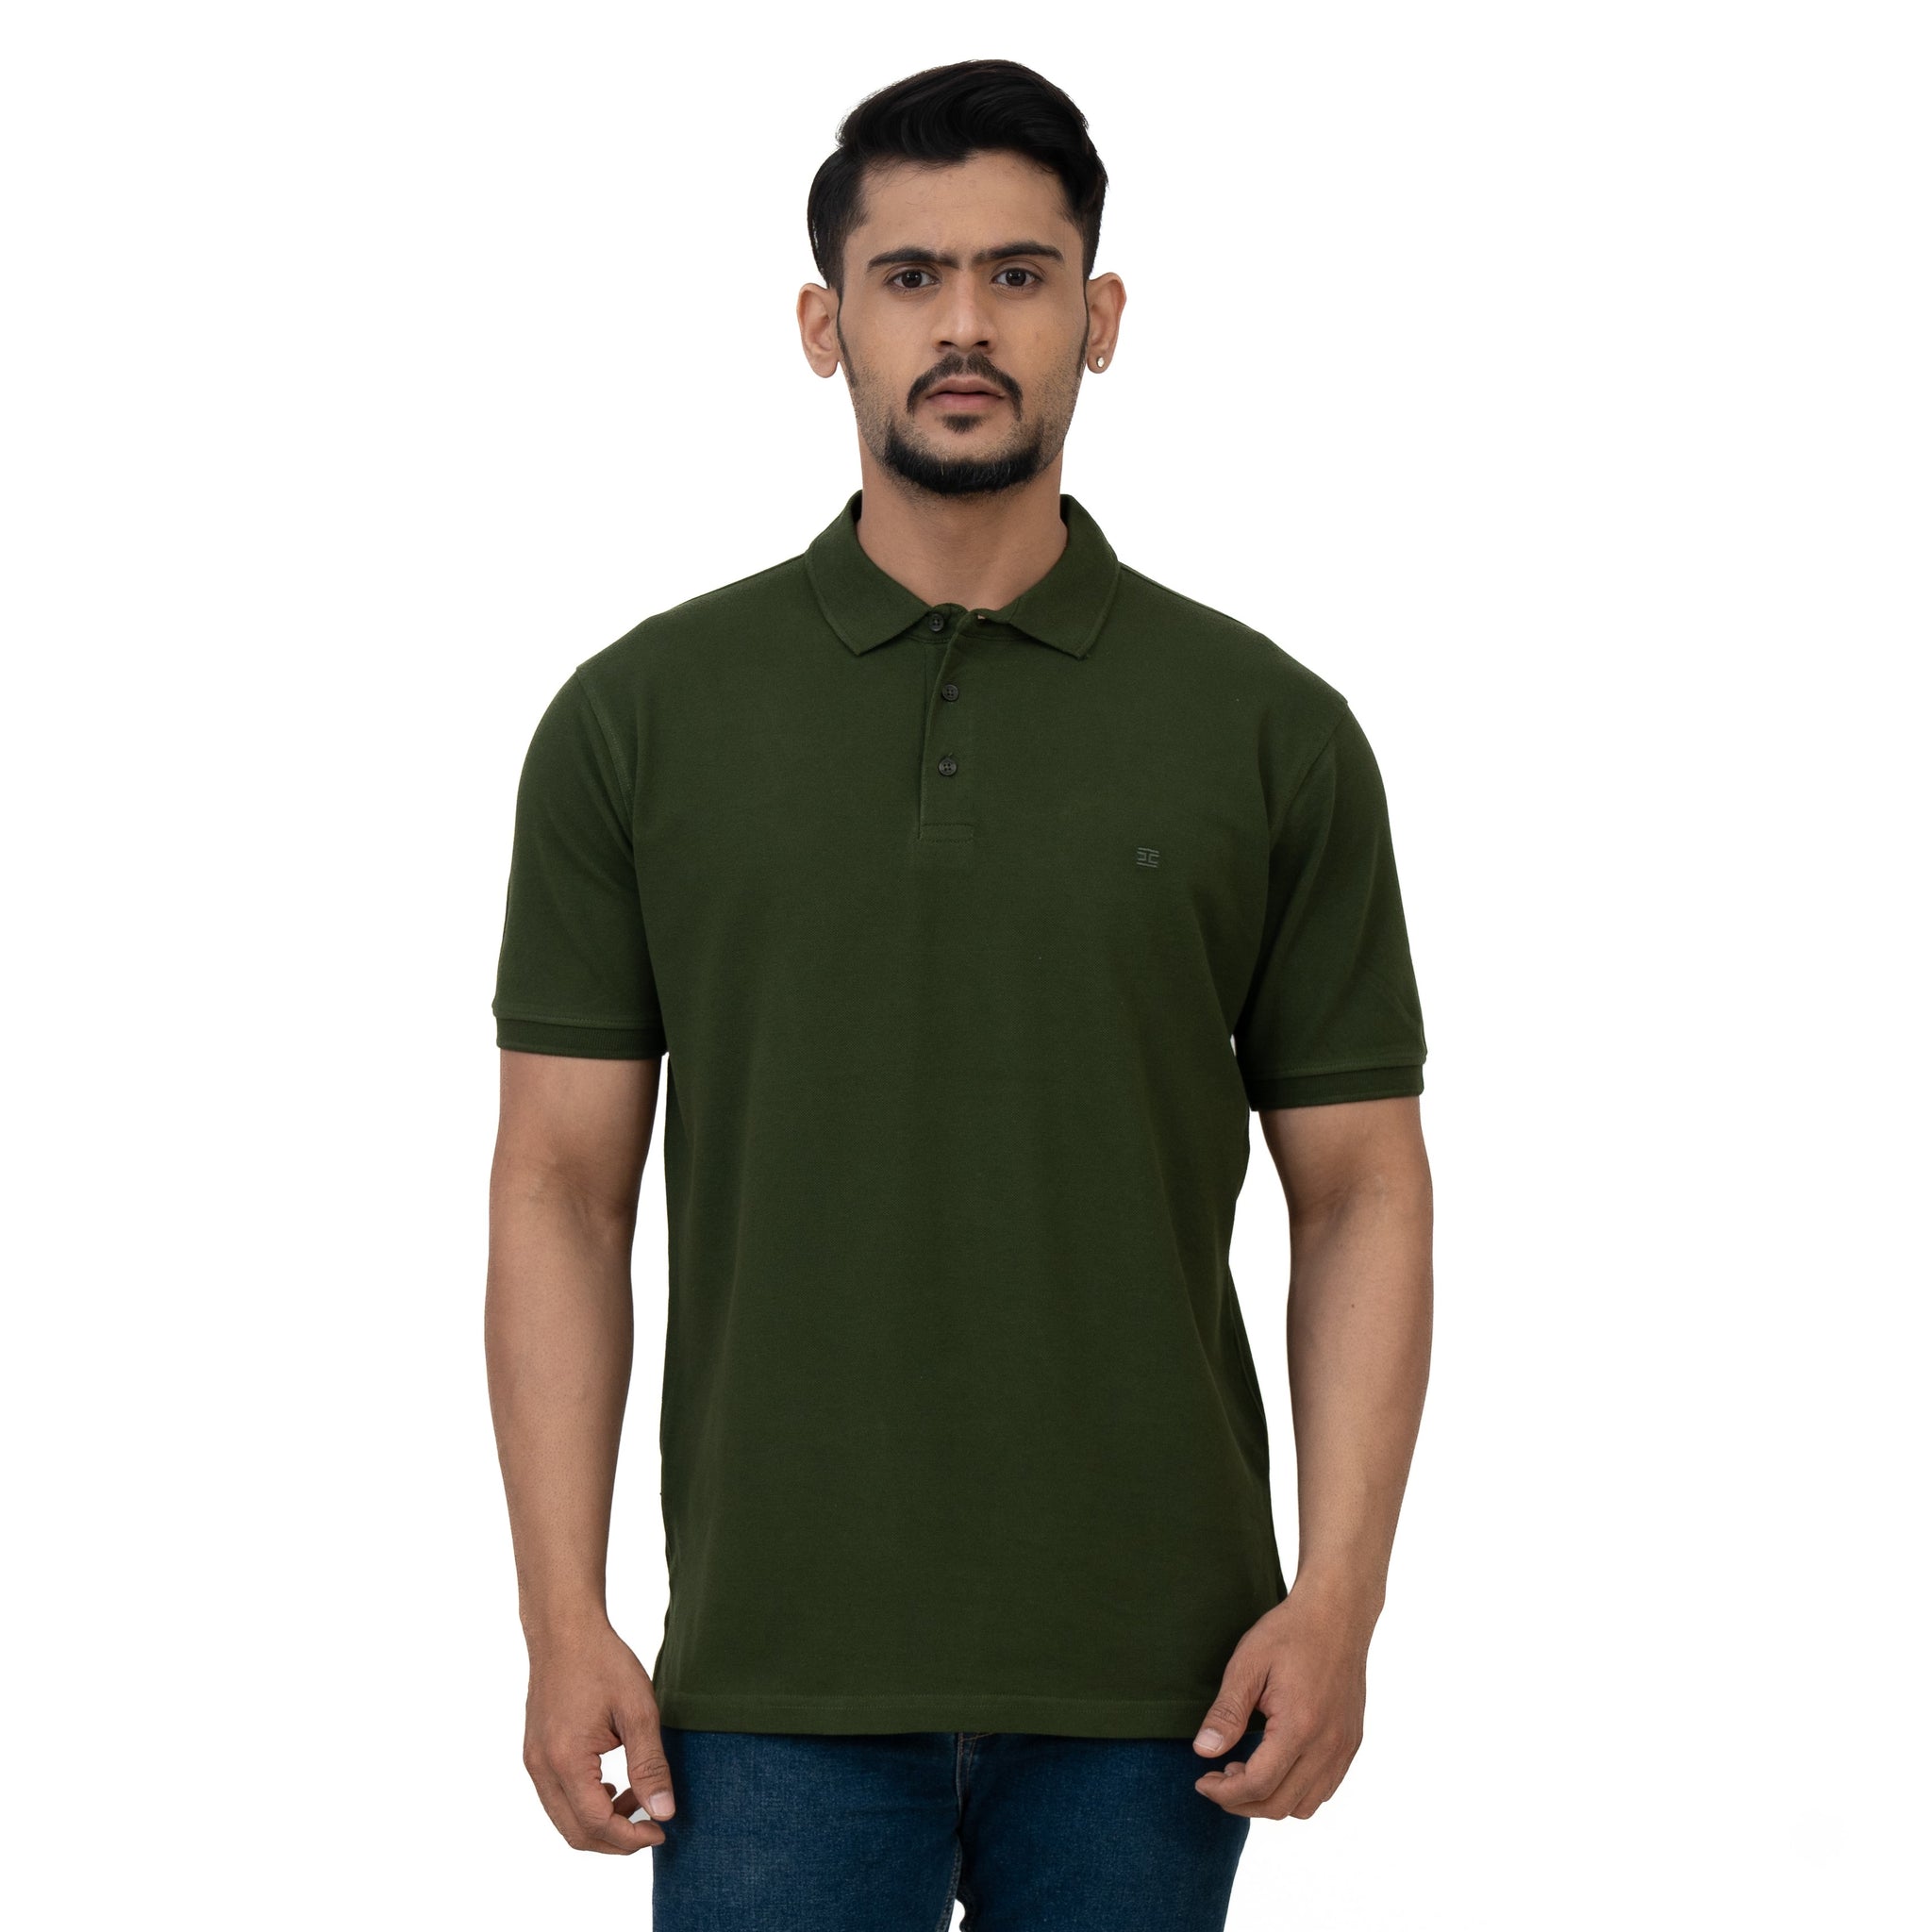 Cotstyle Cotton Fabrics Polo Short Length Plain Half Sleeve Casual & Daily Wear Men's T Shirts - Pack of 1 - Rifle Green Colour